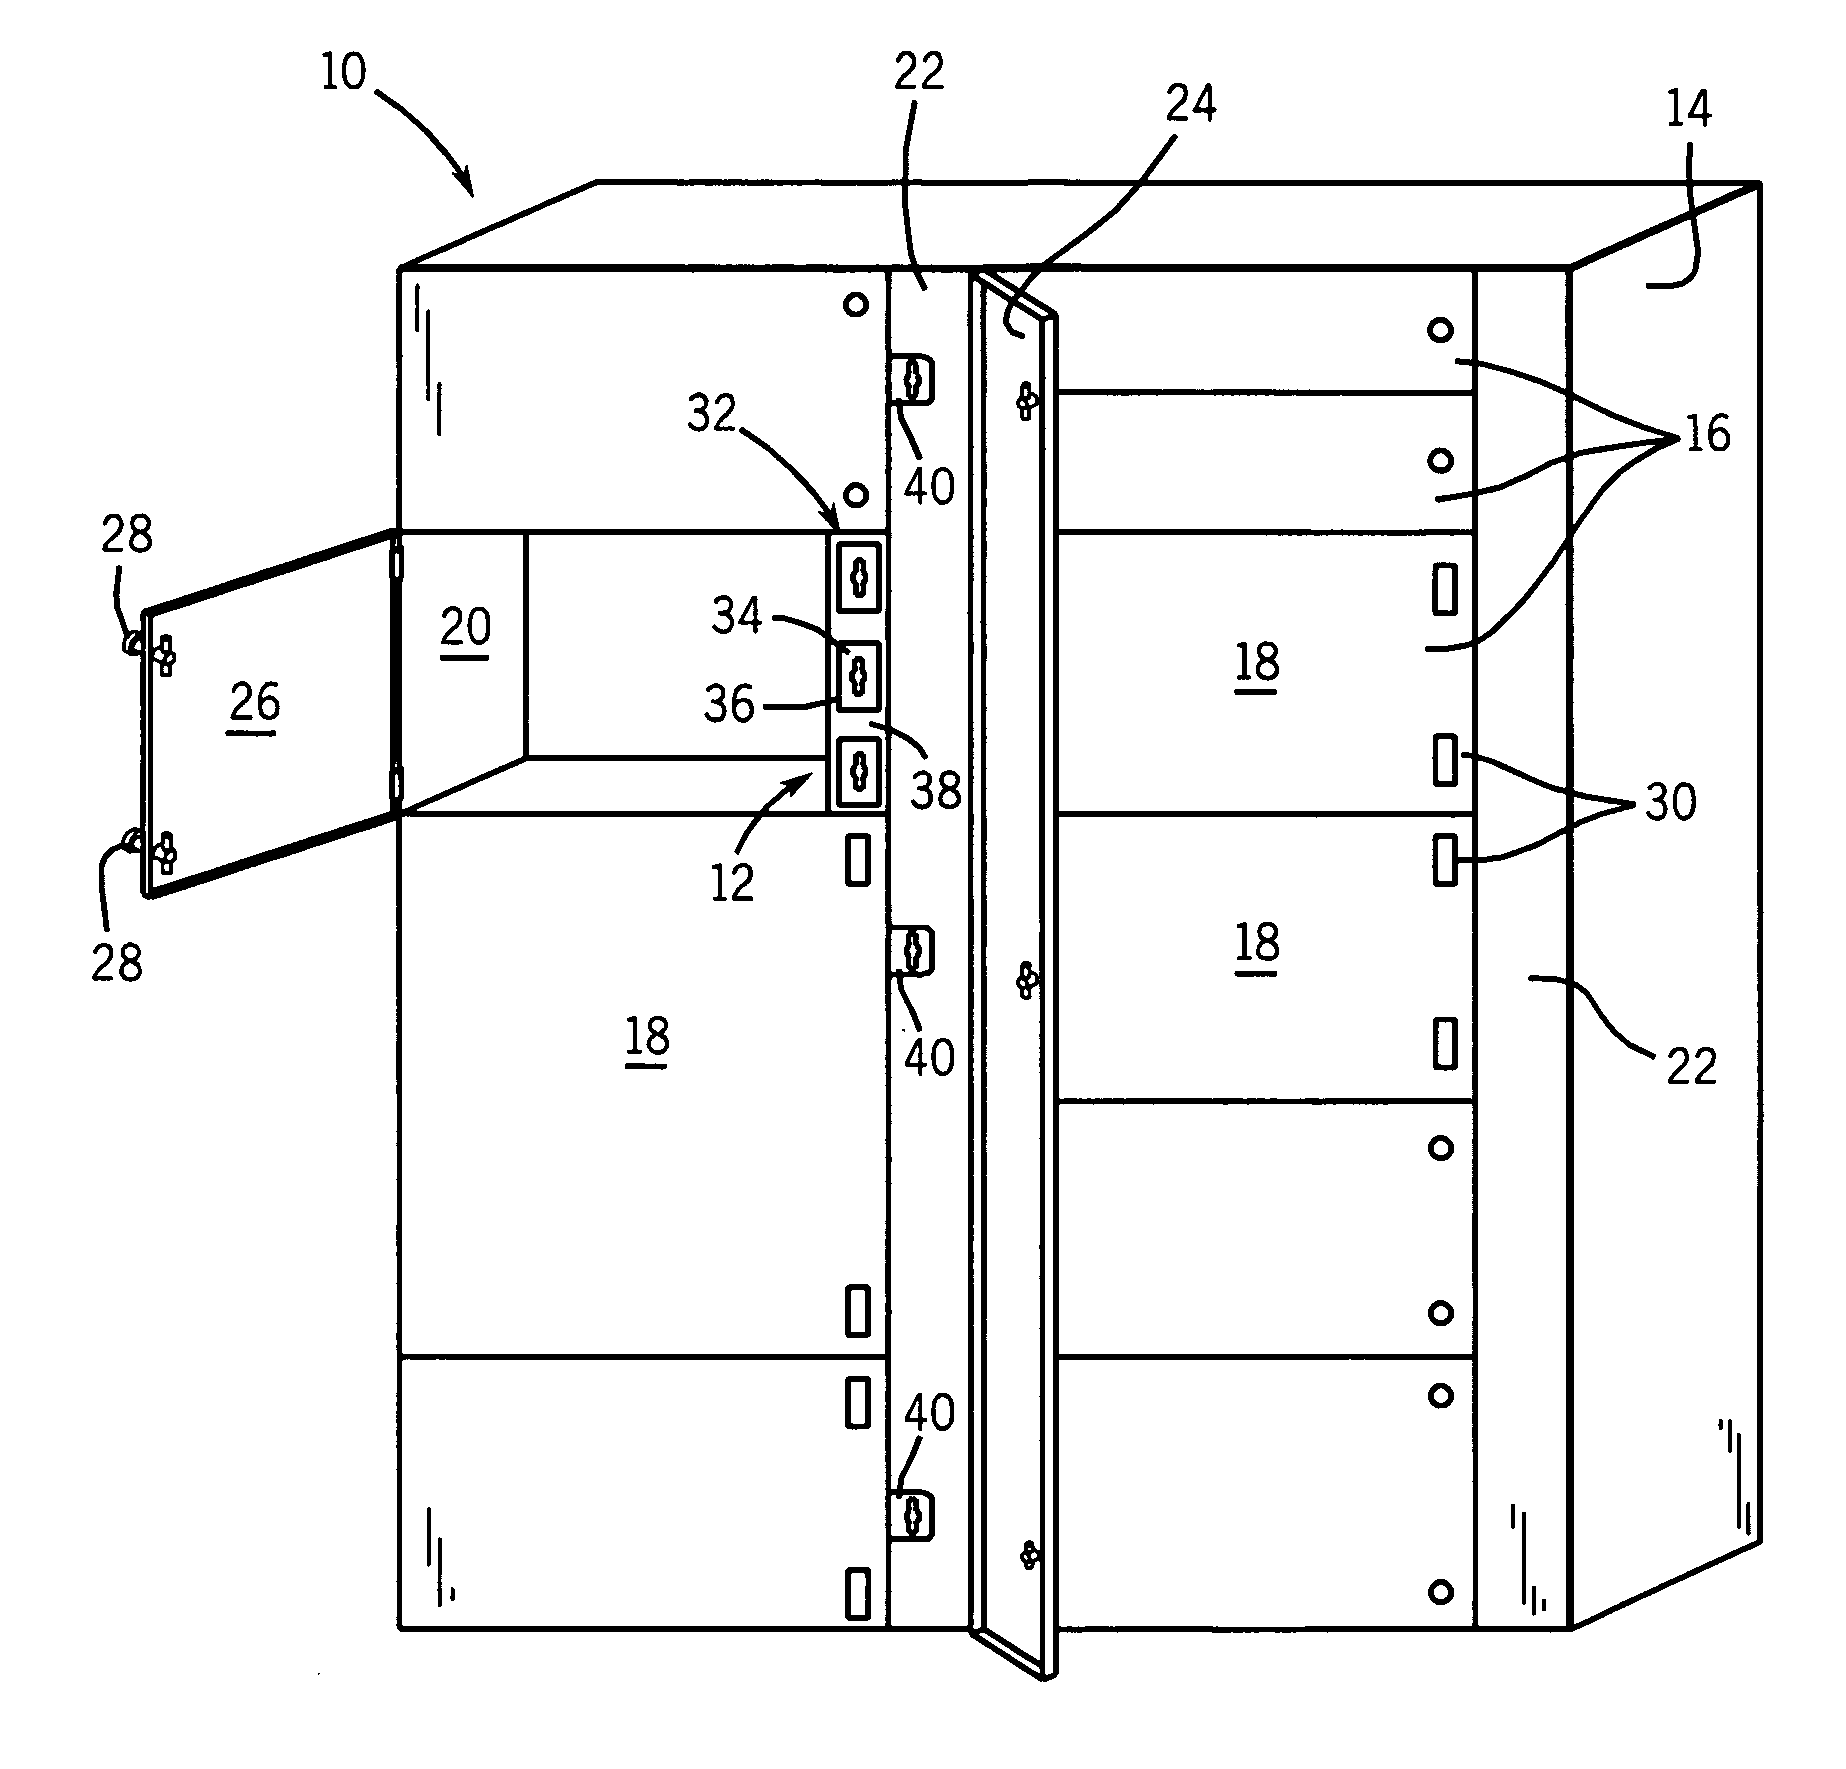 Common structure and door for multiple door electrical enclosure latching systems